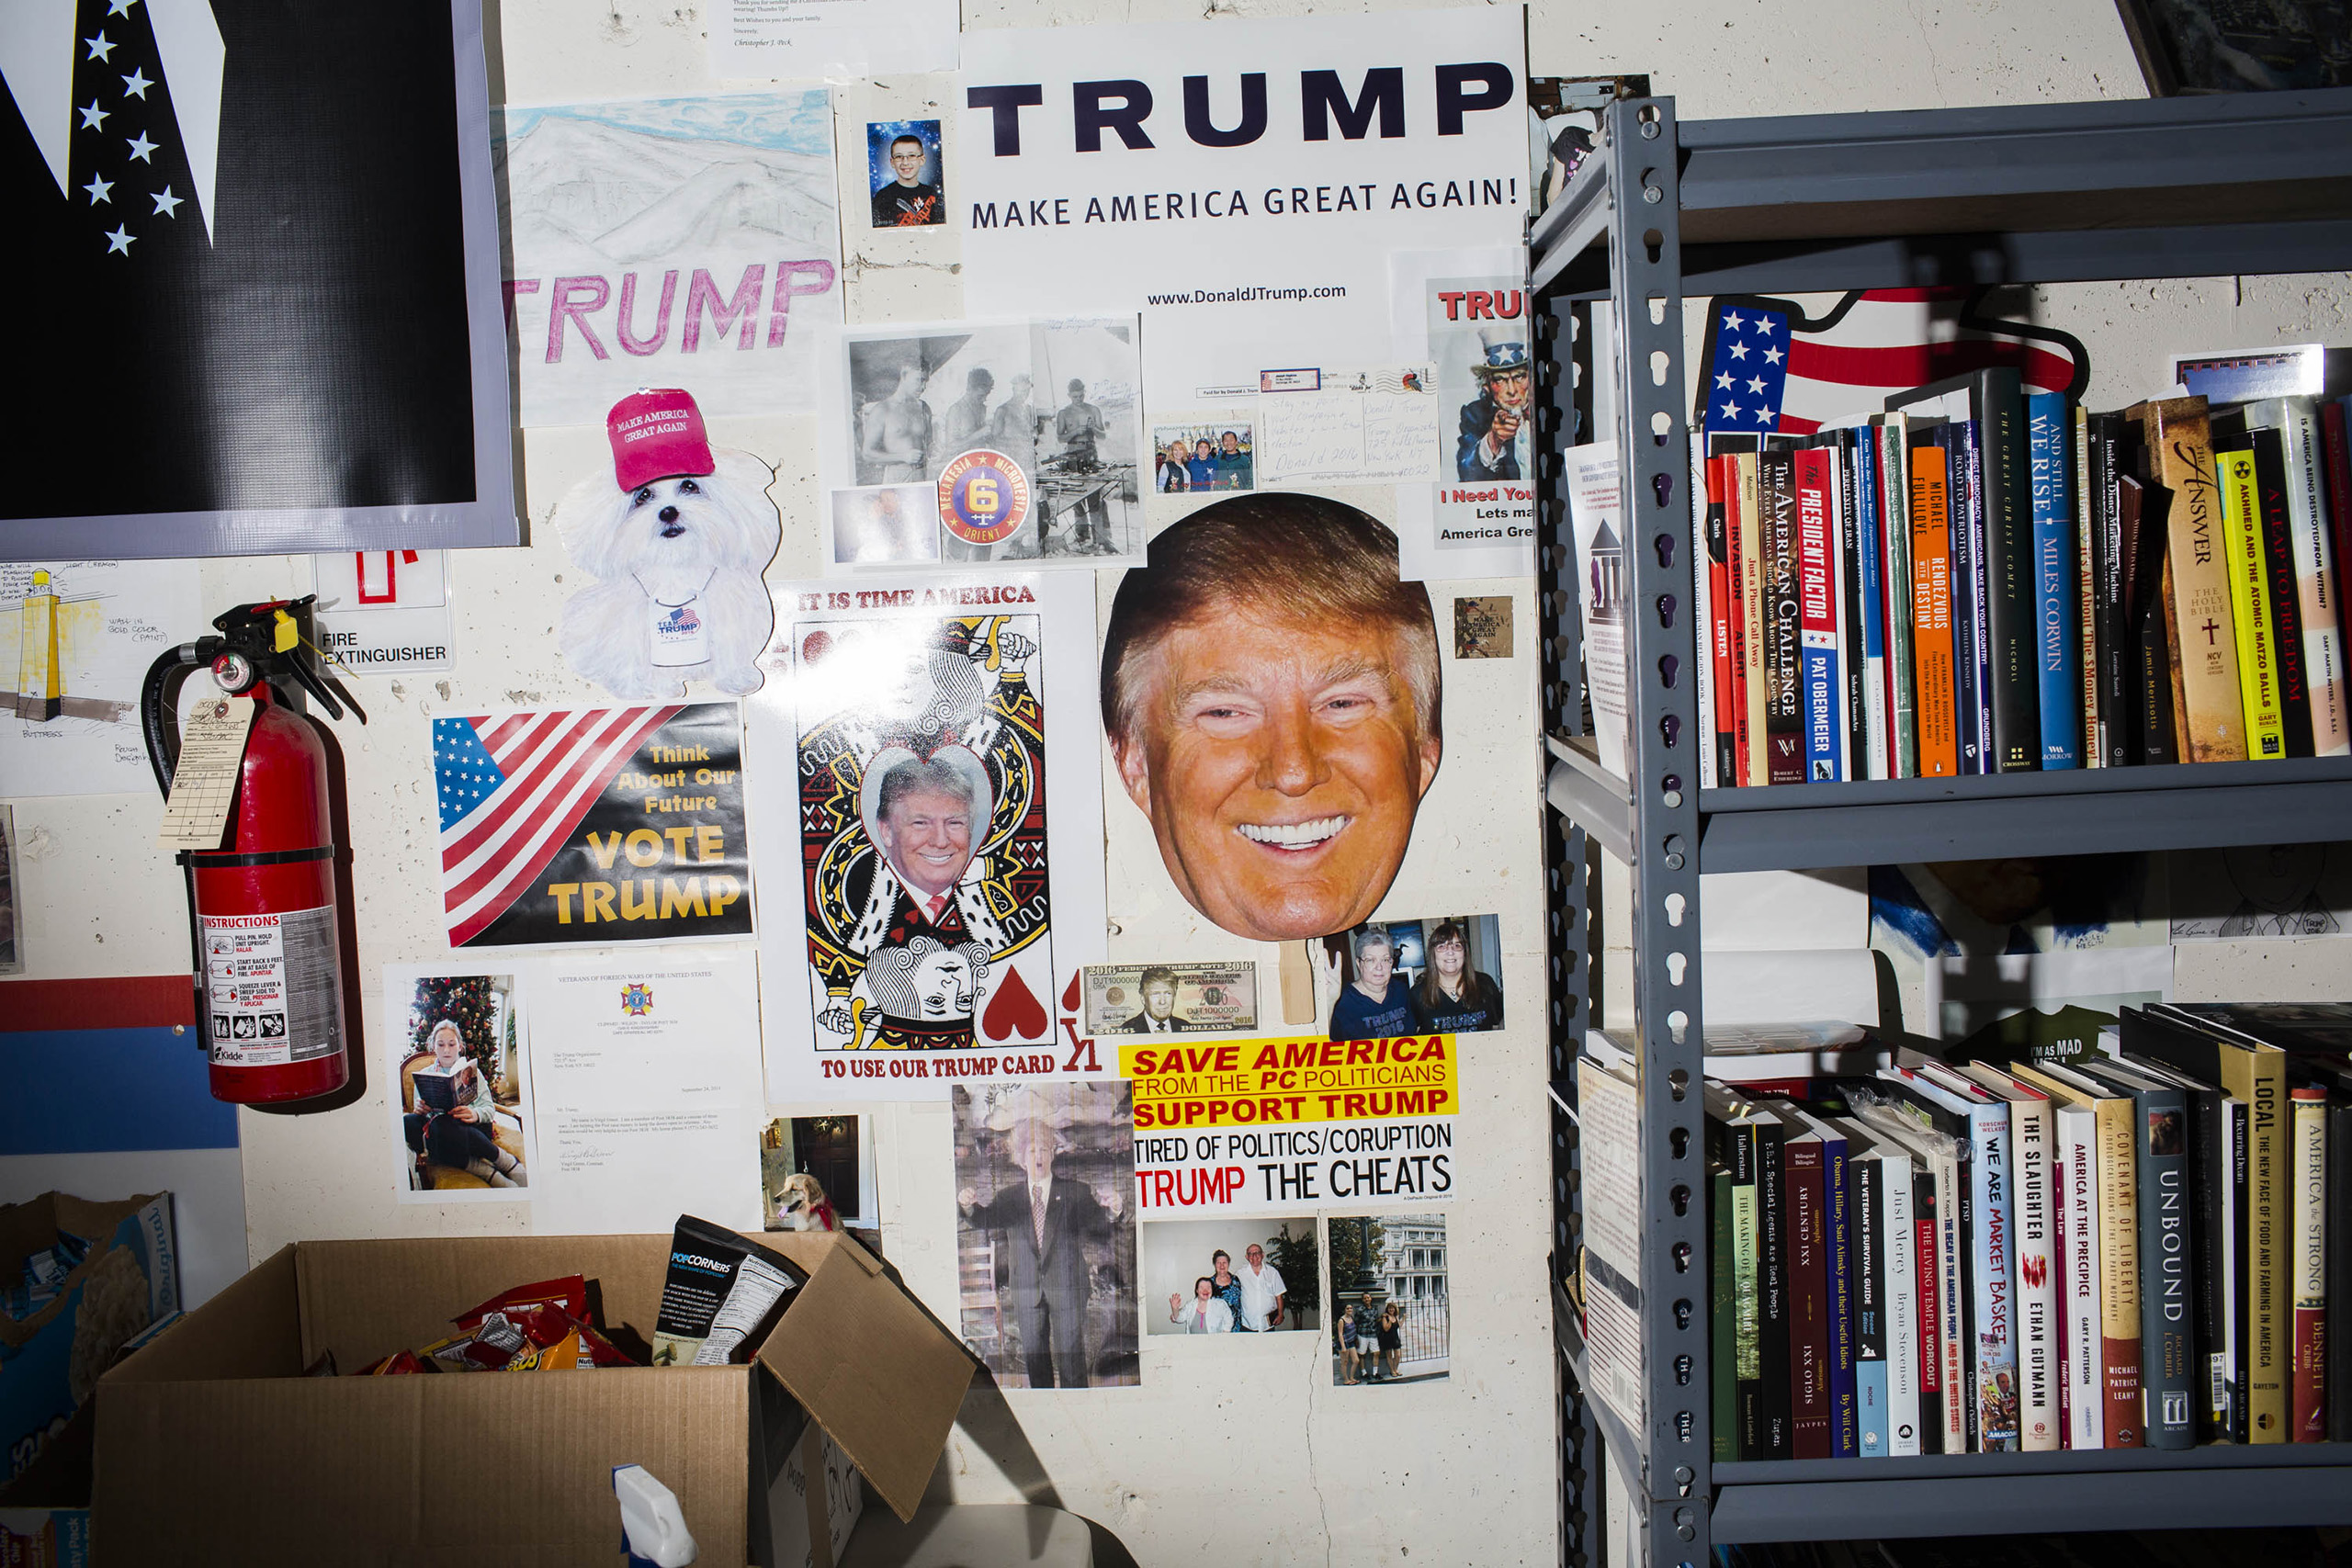 The Trump headquarters are decorated with campaign memorabilia.  Inside the office May 24, 2016, in Trump Tower in New York City.